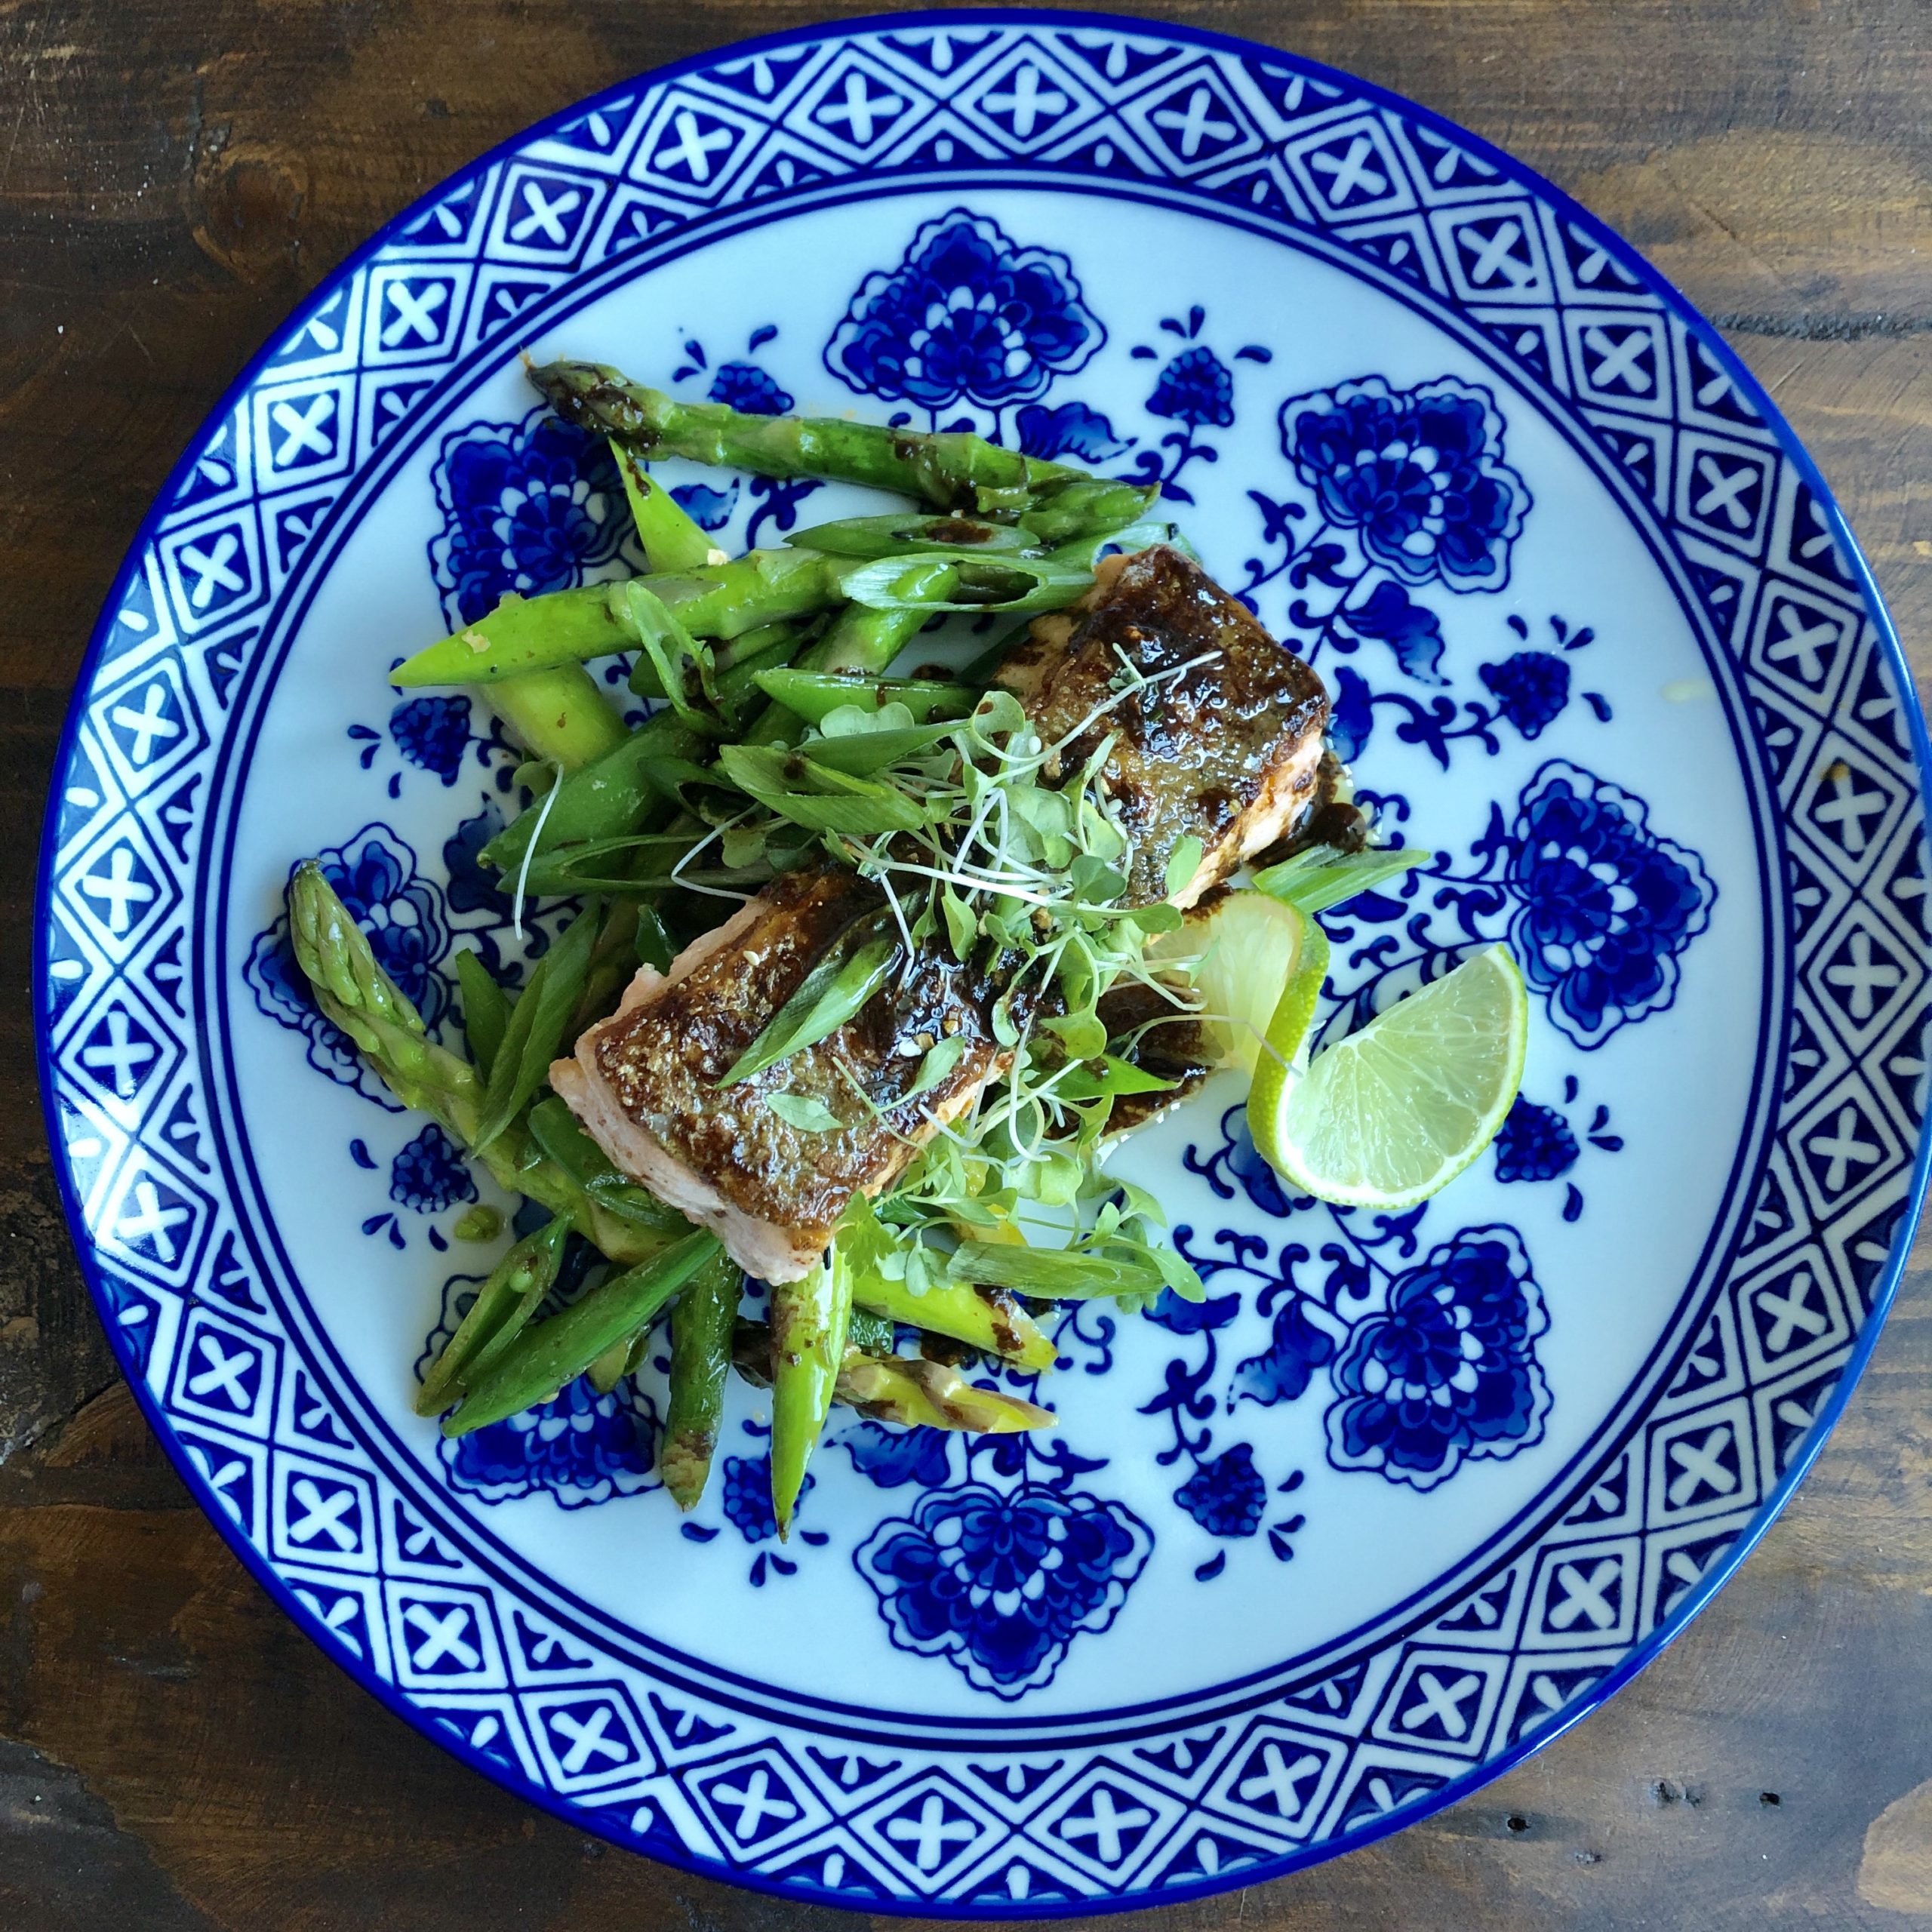 Crispy-Skinned Salmon with Asparagus, Snap Peas and Miso-Ginger Sauce Recipe